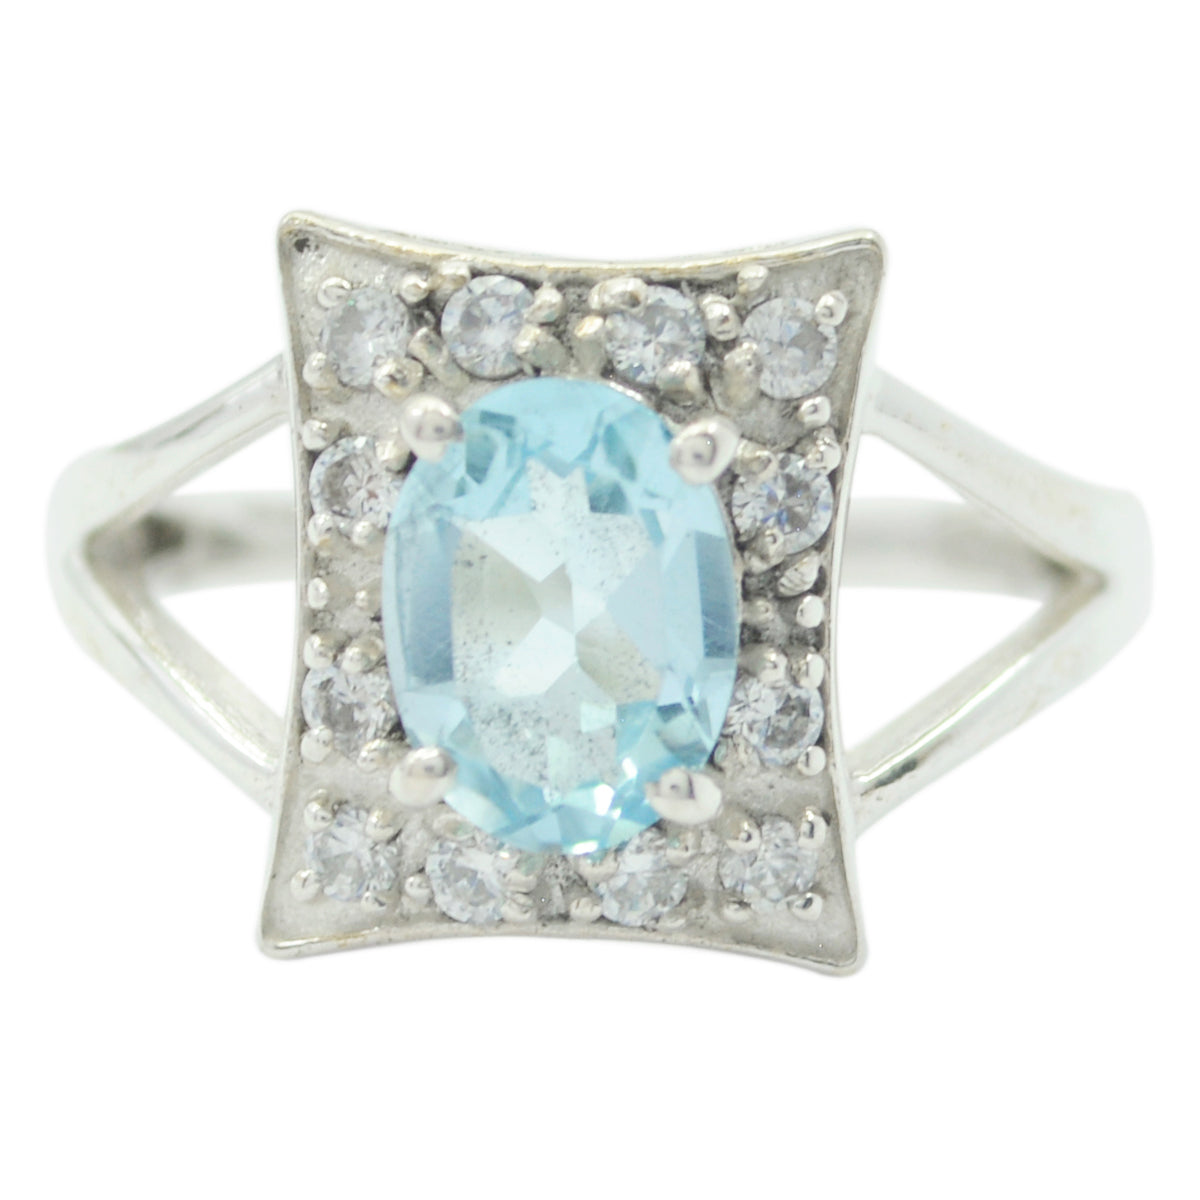 Engaging Gems Blue Topaz Sterling Silver Ring Medical Alert Jewelry